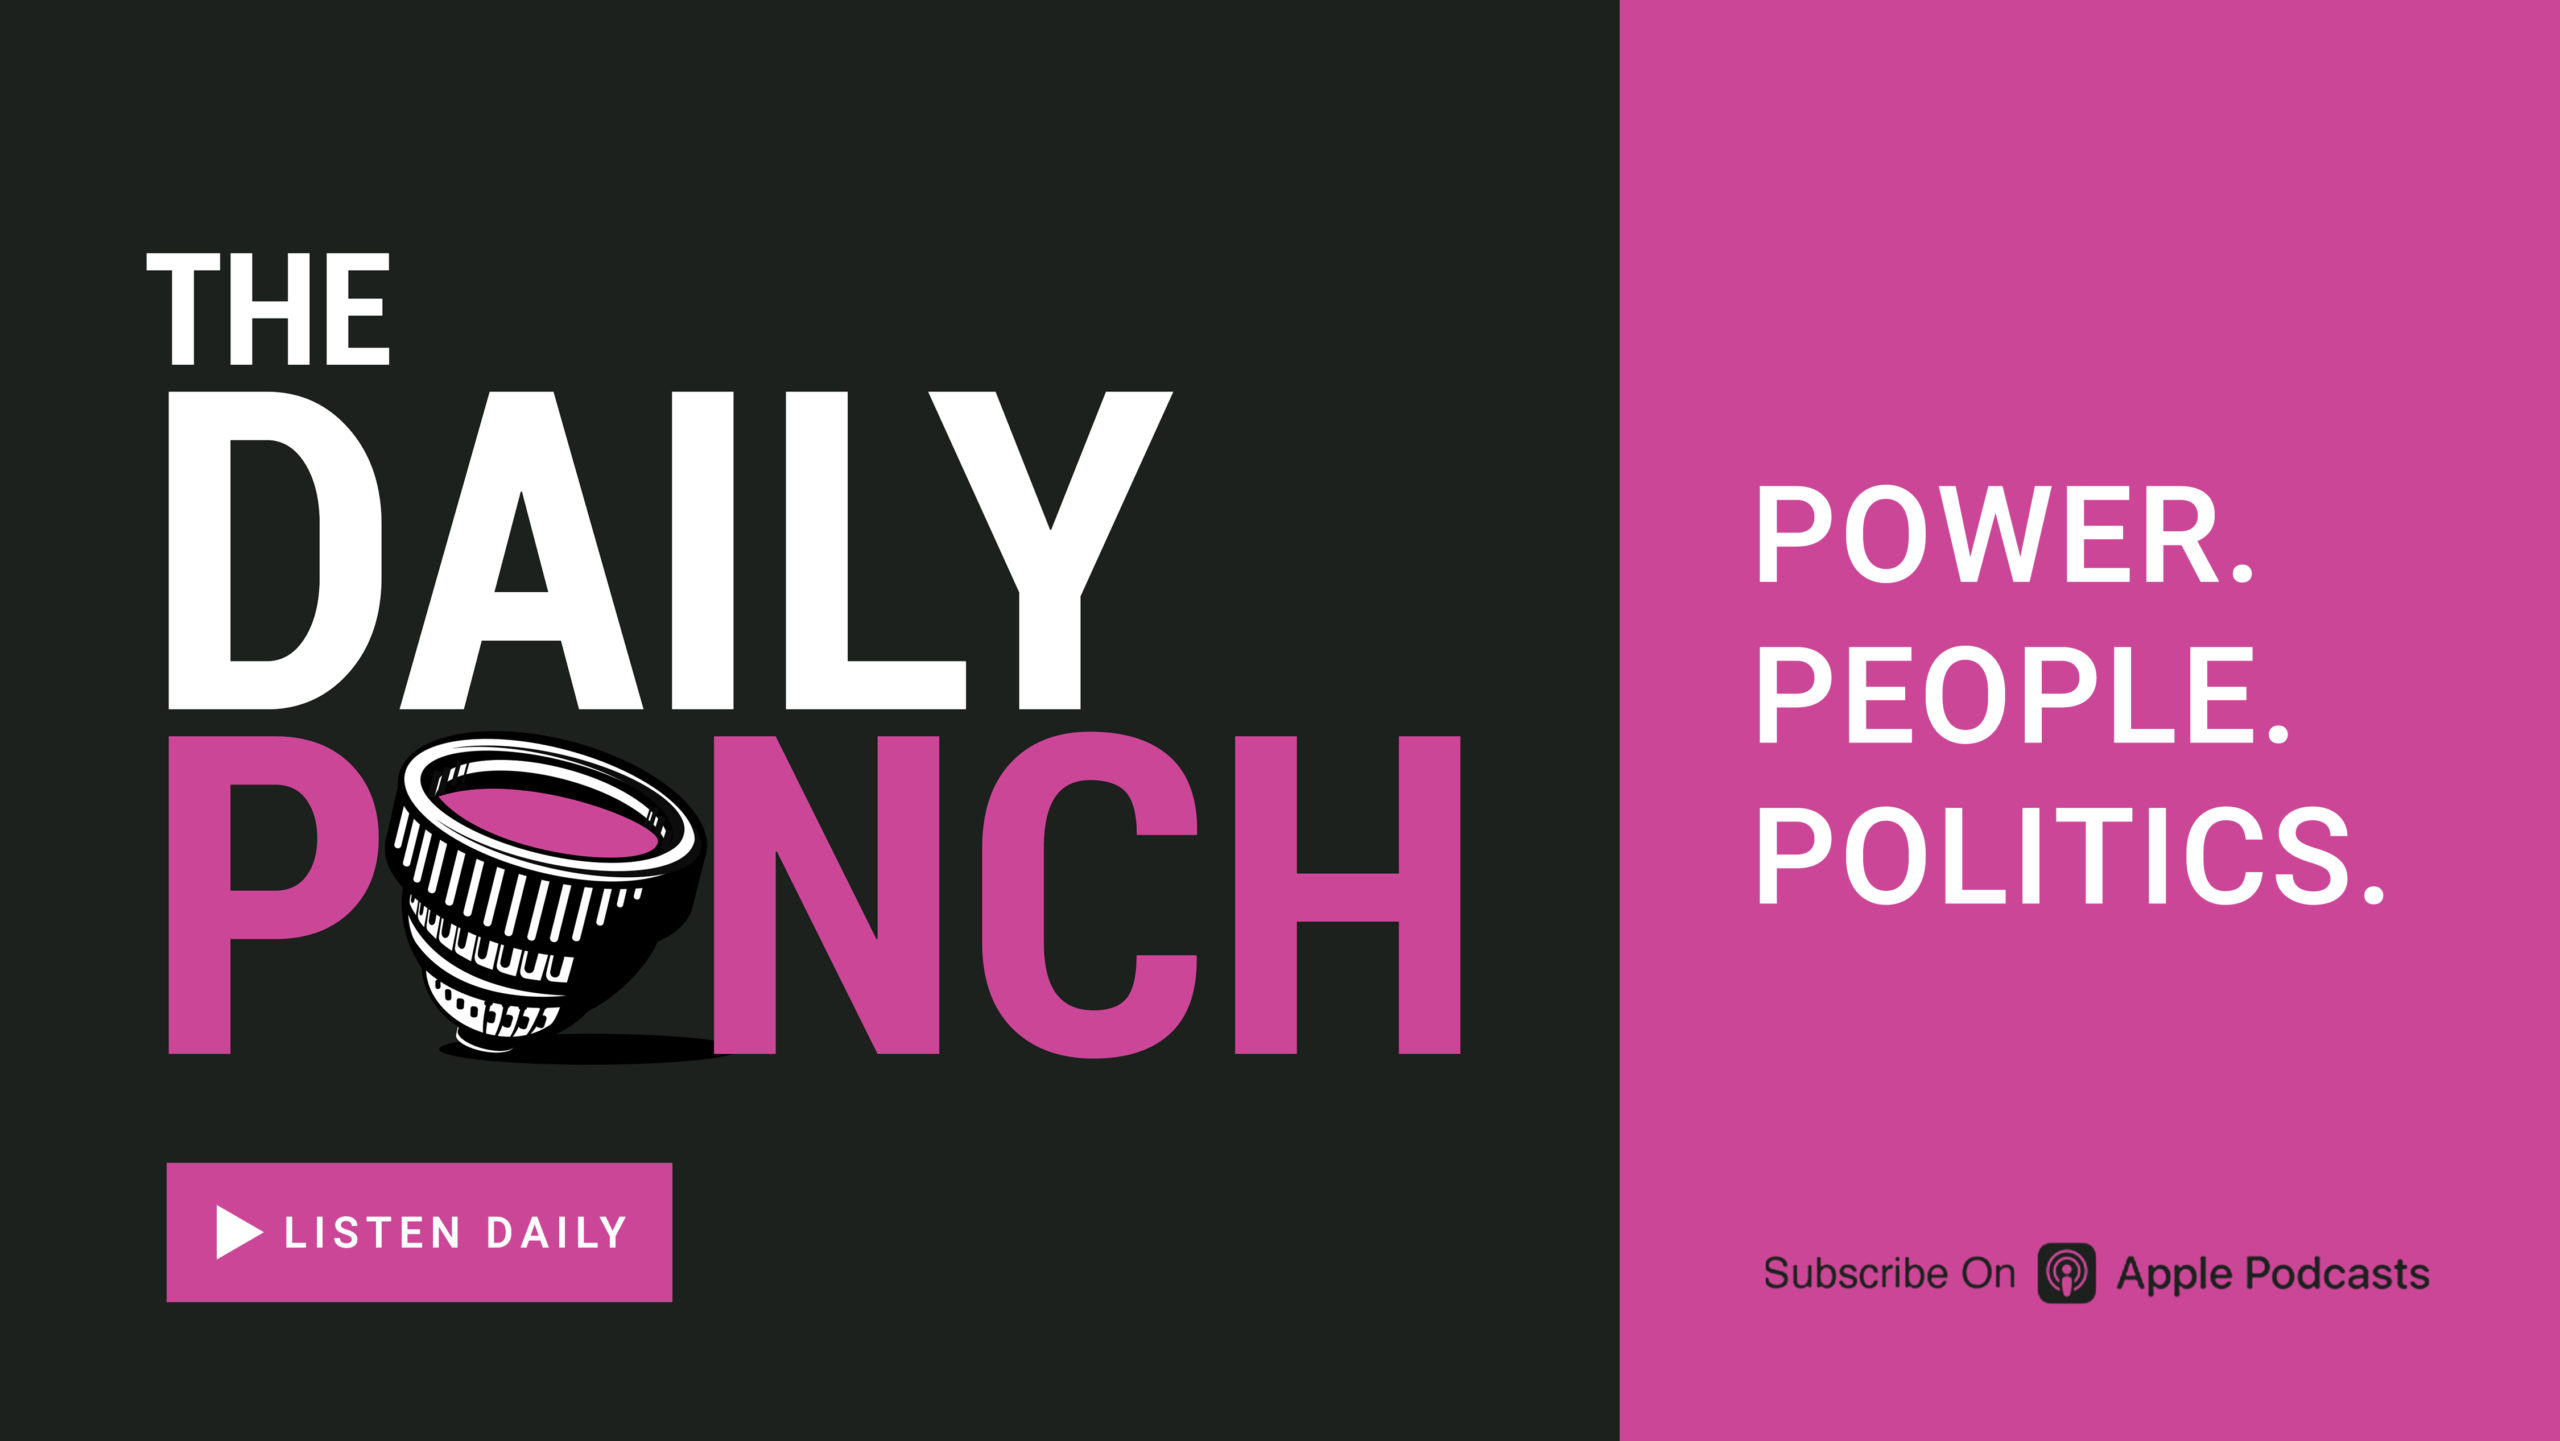 Listen to The Daily Punch by Punchbowl News. On Apple Podcasts